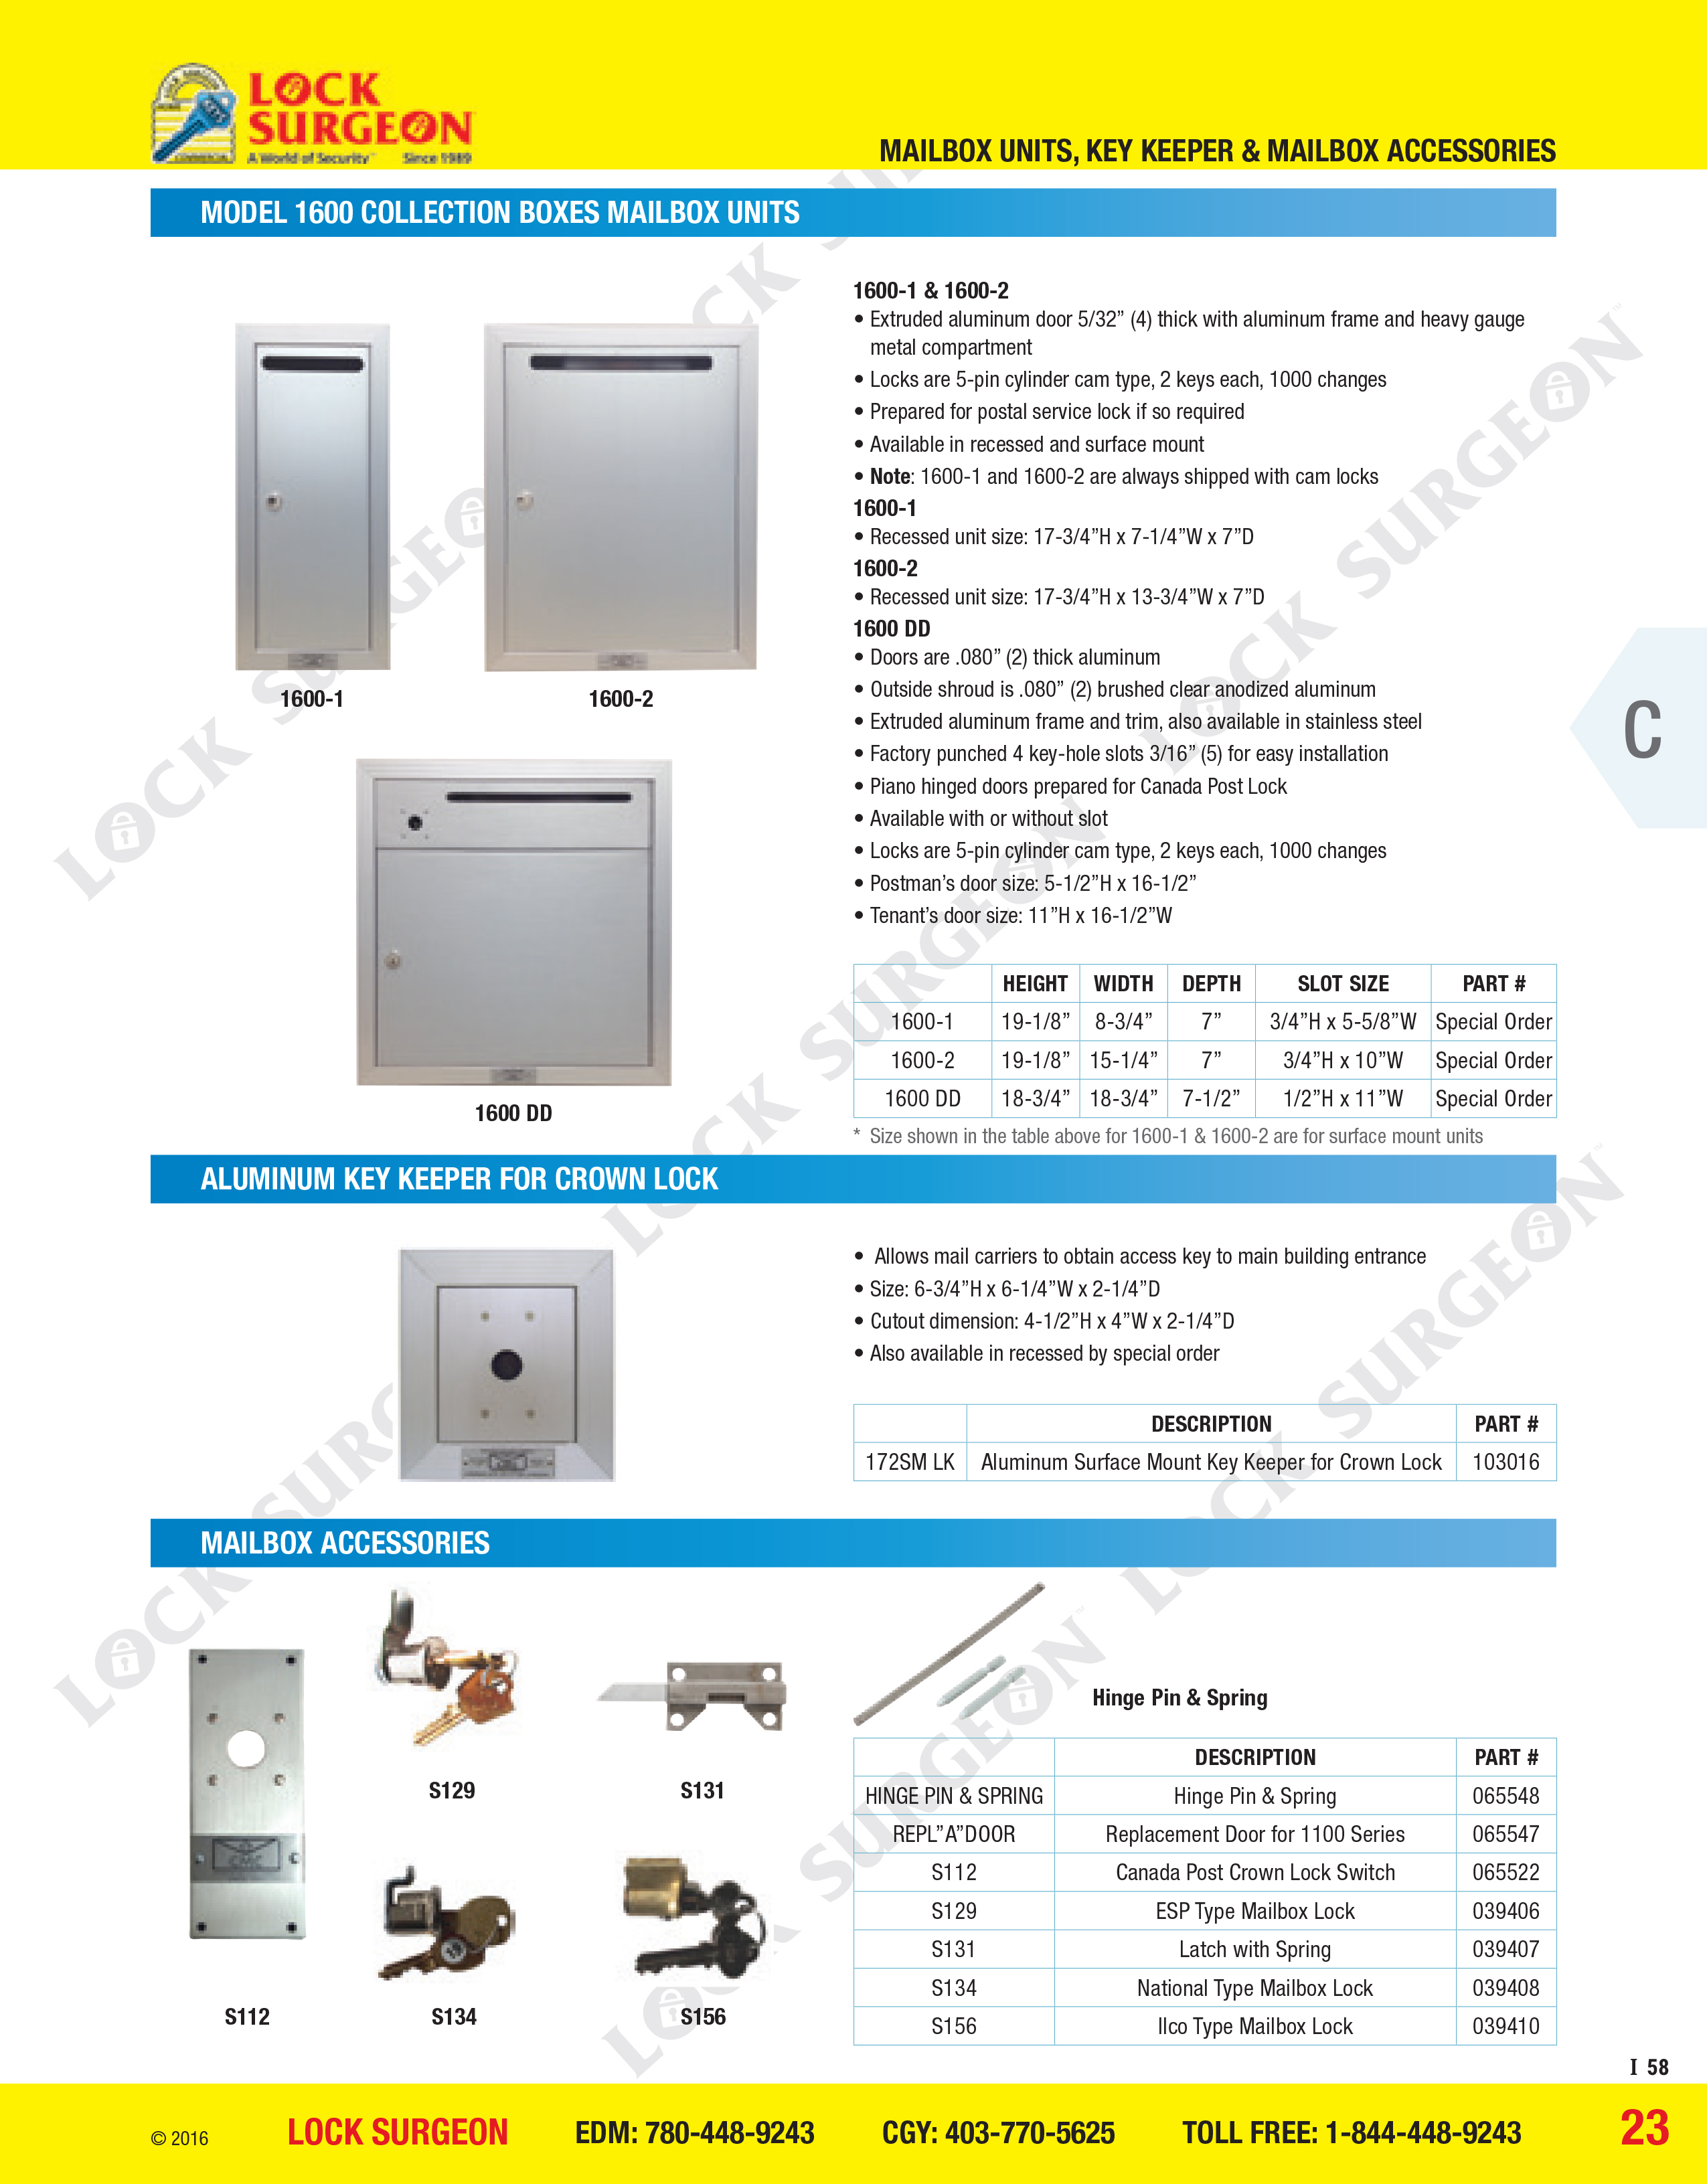 Model 1600 collection boxes mailbox units aluminium key keeper for crown lock Mailbox accessories